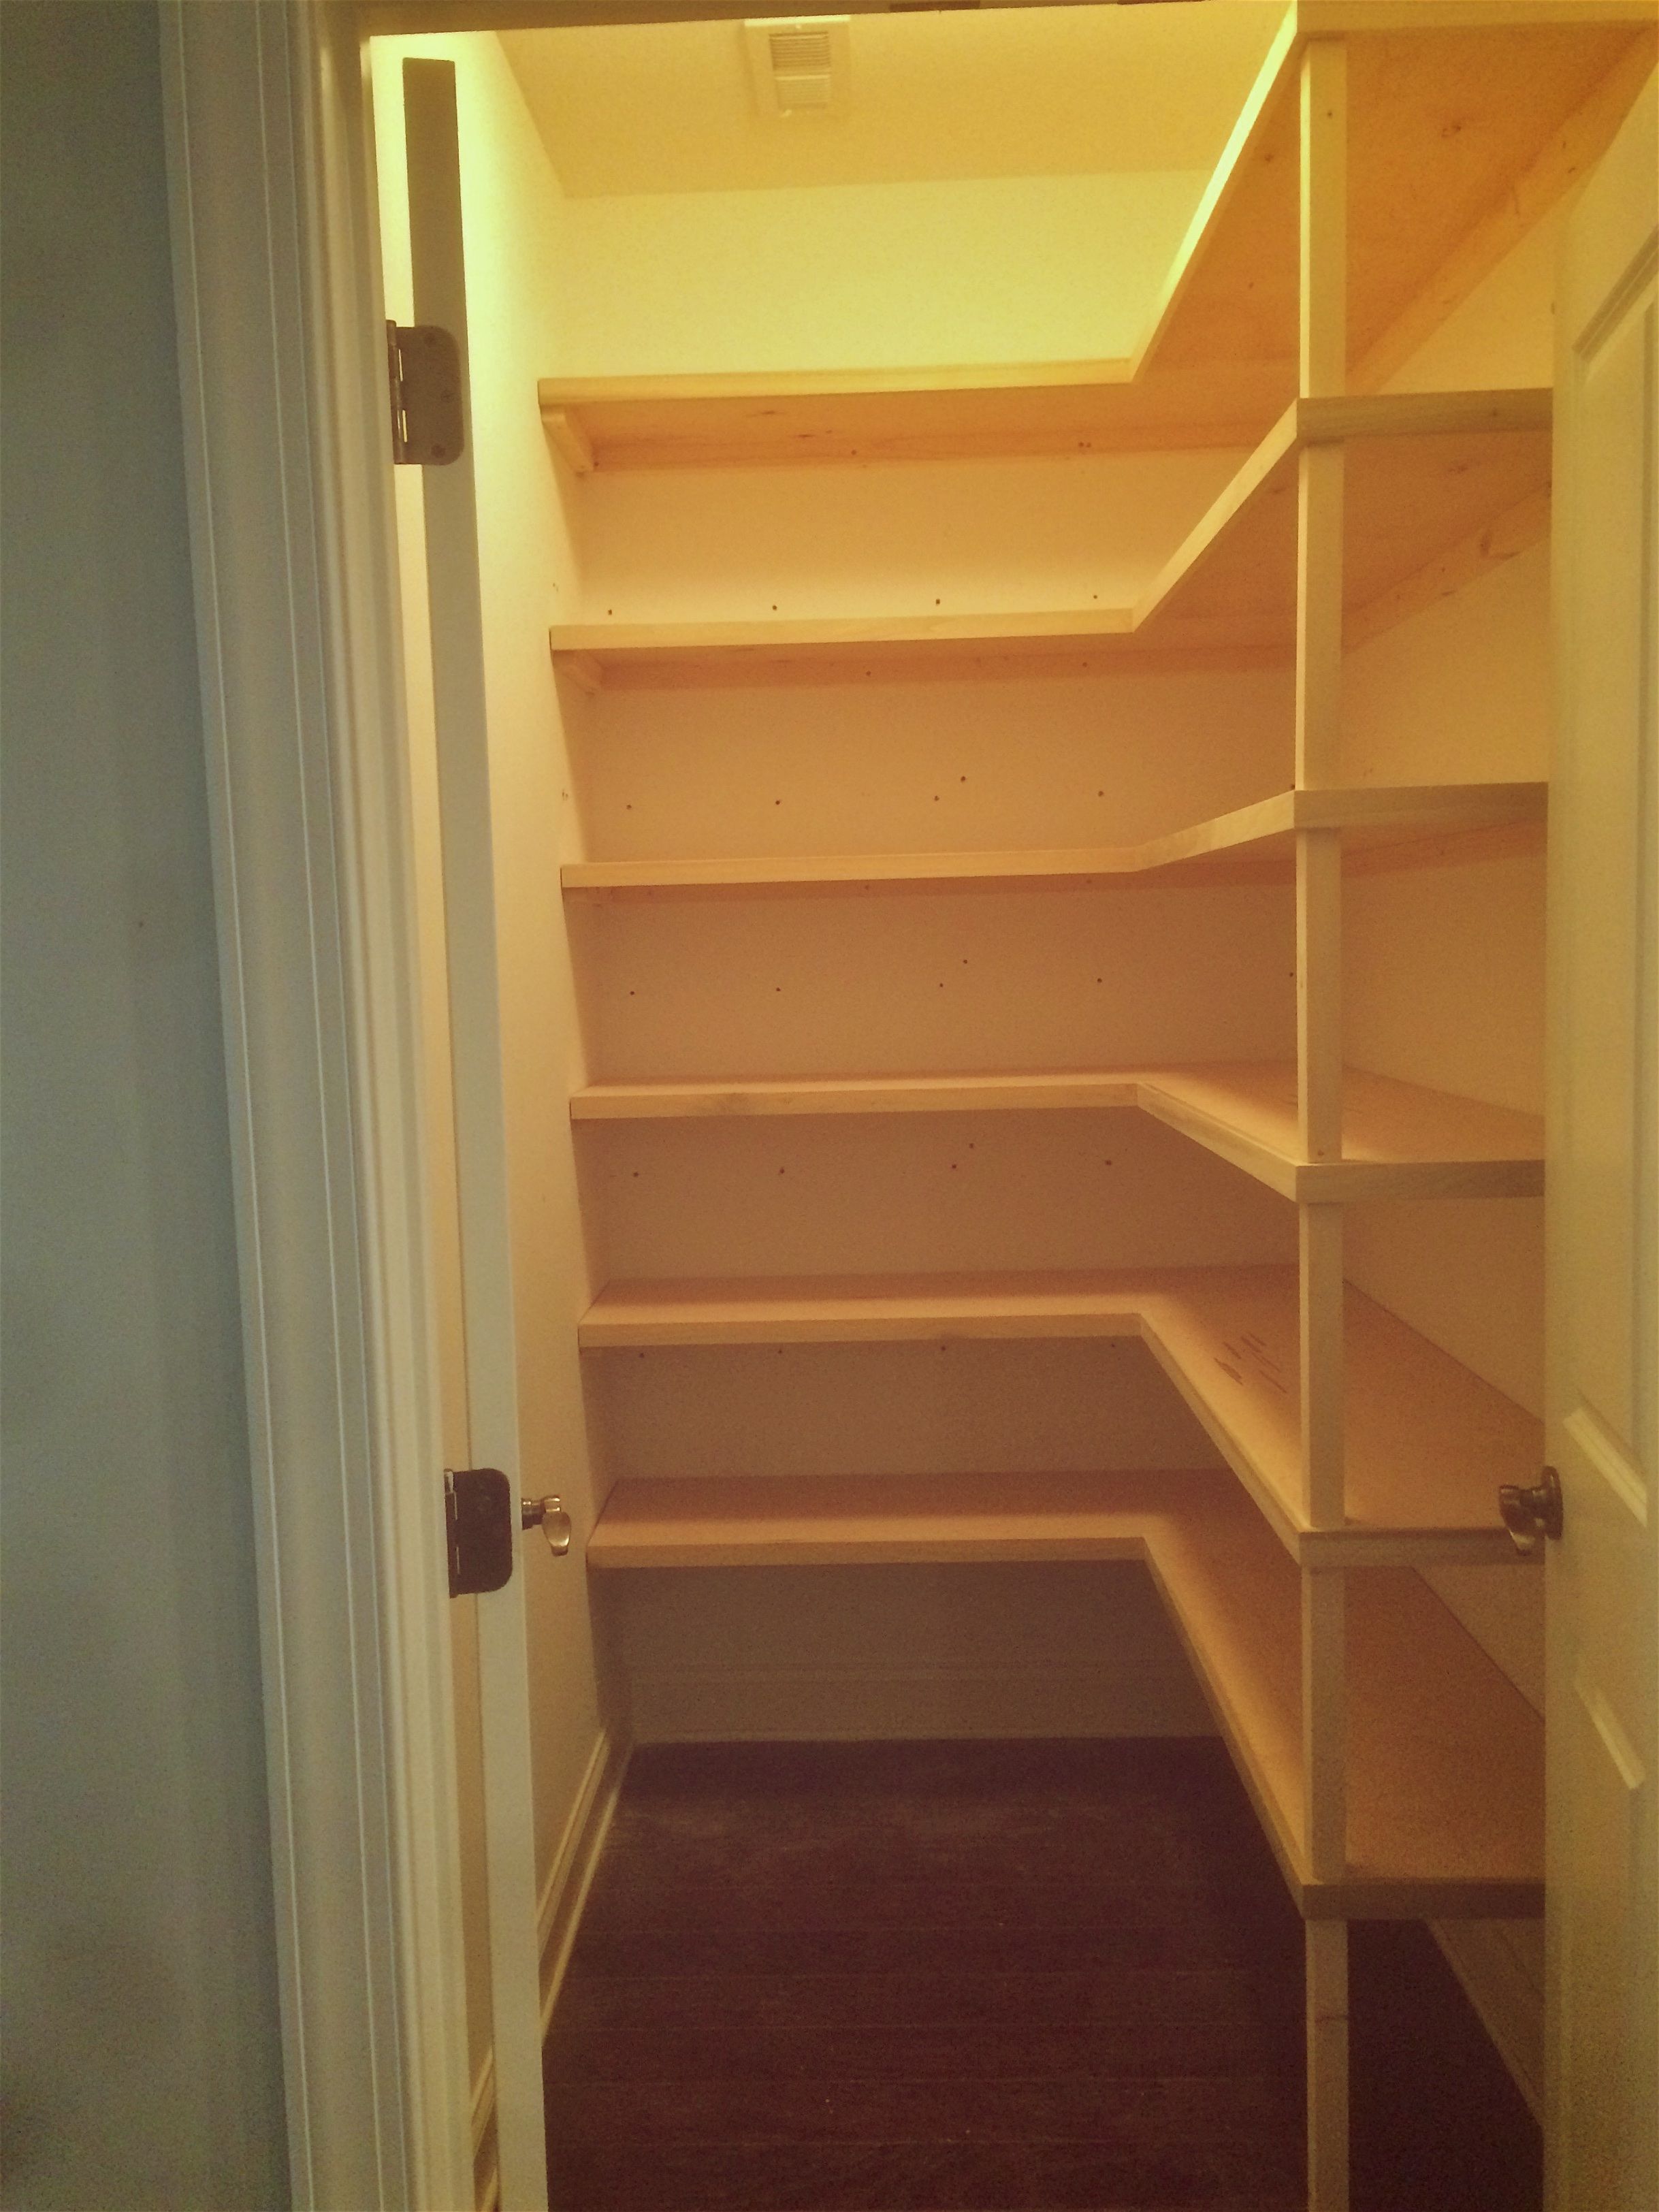 Hand Crafted Custom Built-Ins - Bookcases, Pantry, Closet, Shelving by ...